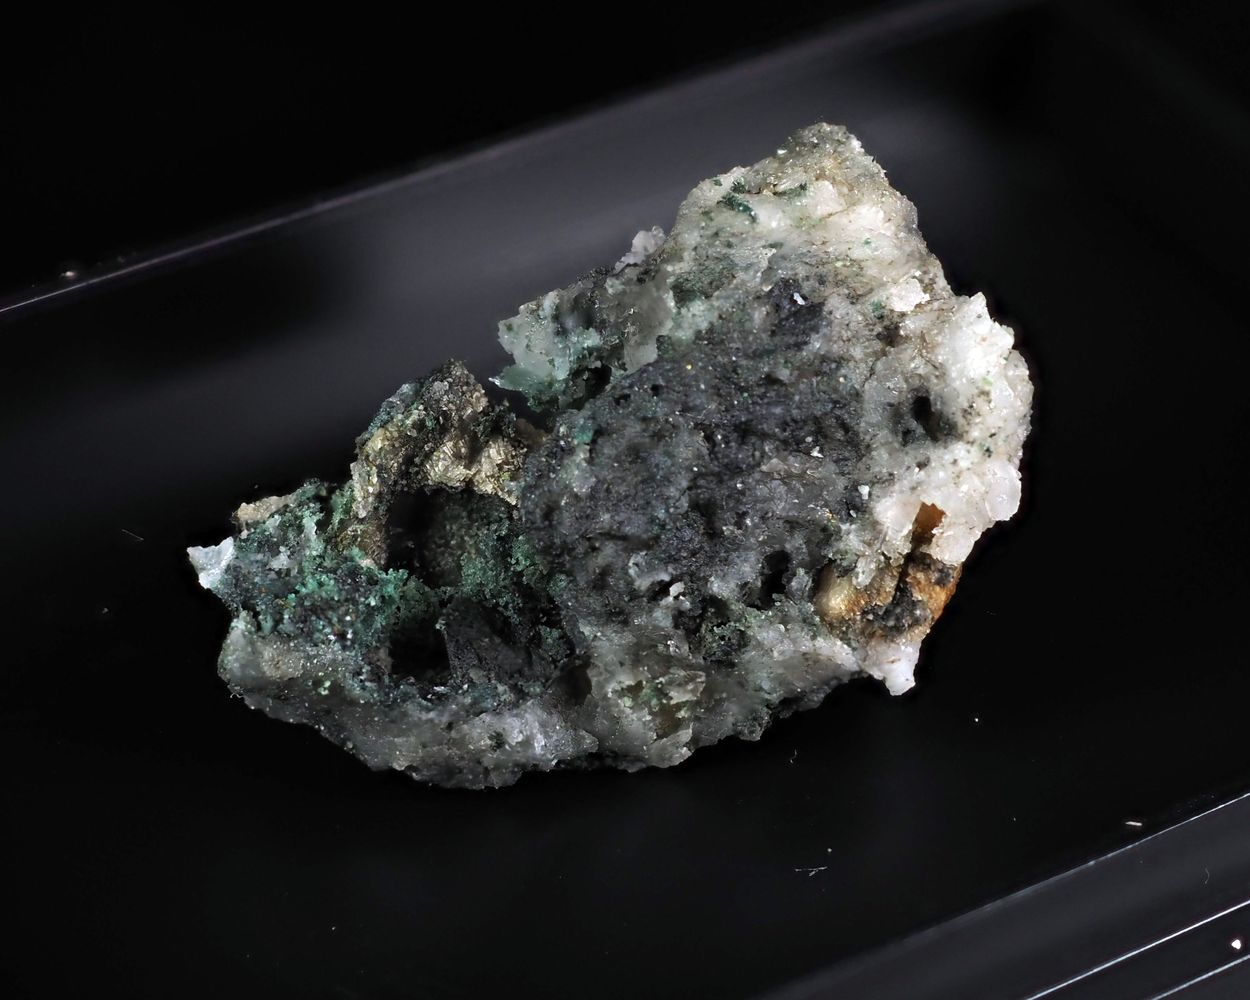 Gold With Fuchsite